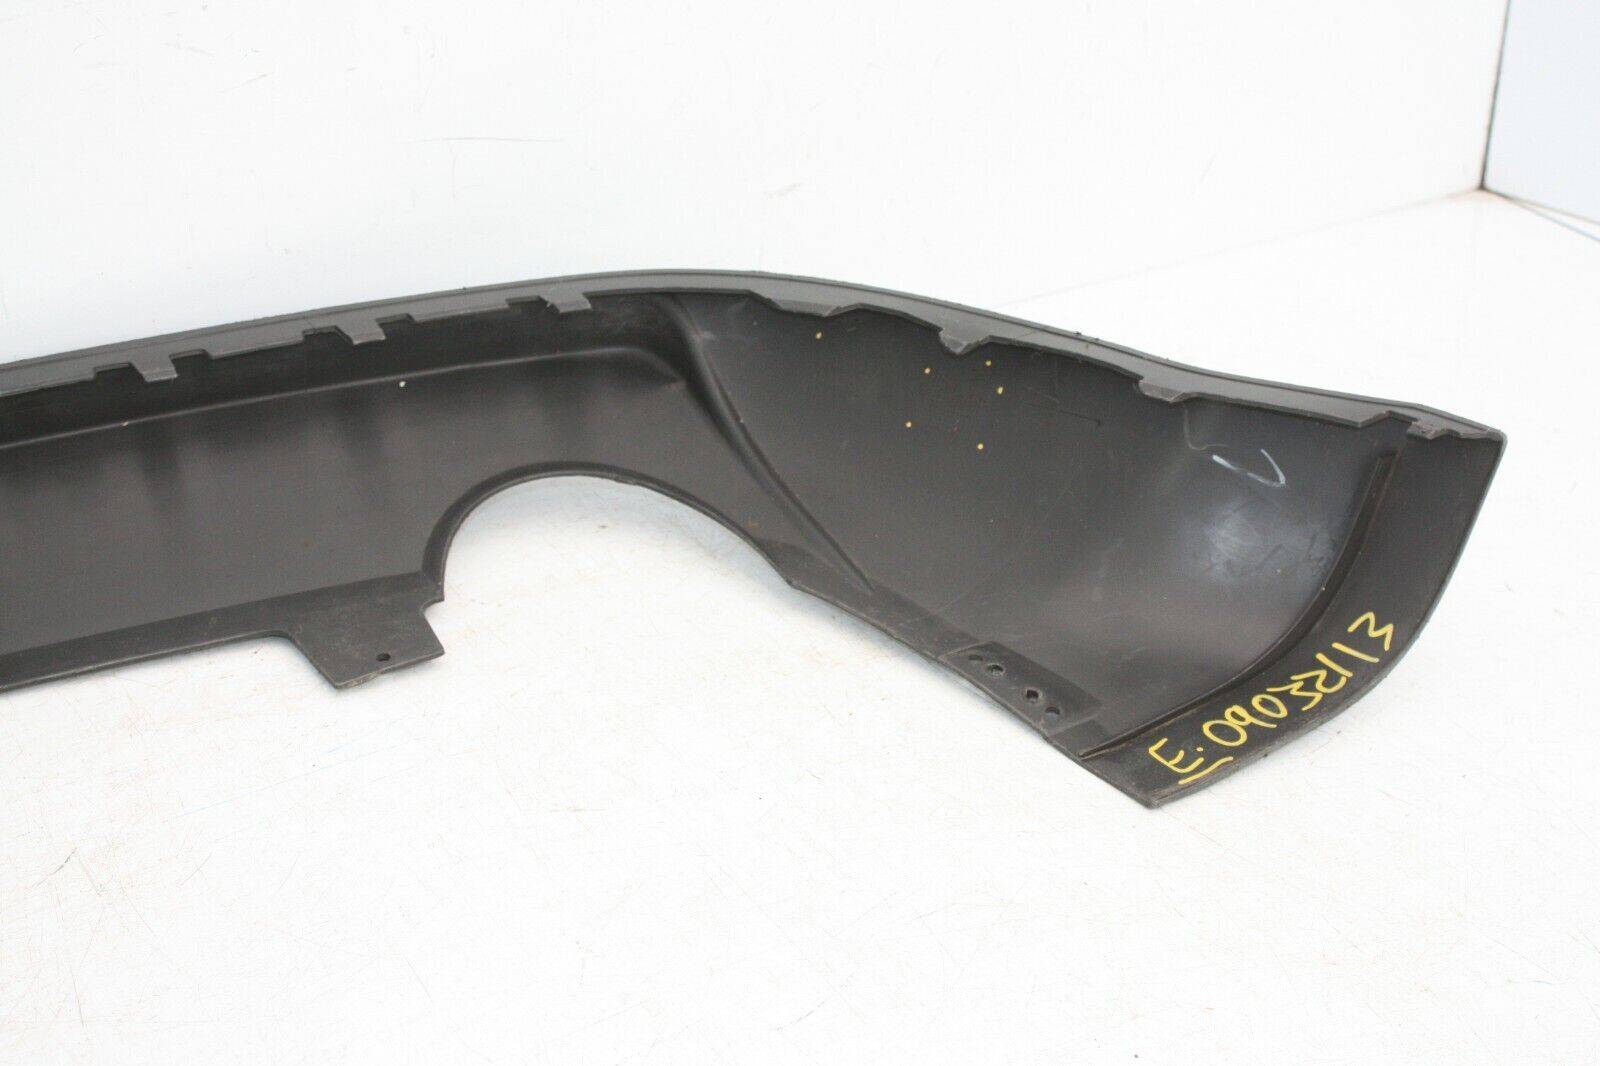 Ford-C-Max-Rear-Bumper-Lower-Section-2004-To-2007-3M51-R17A894-AB-175902867116-8